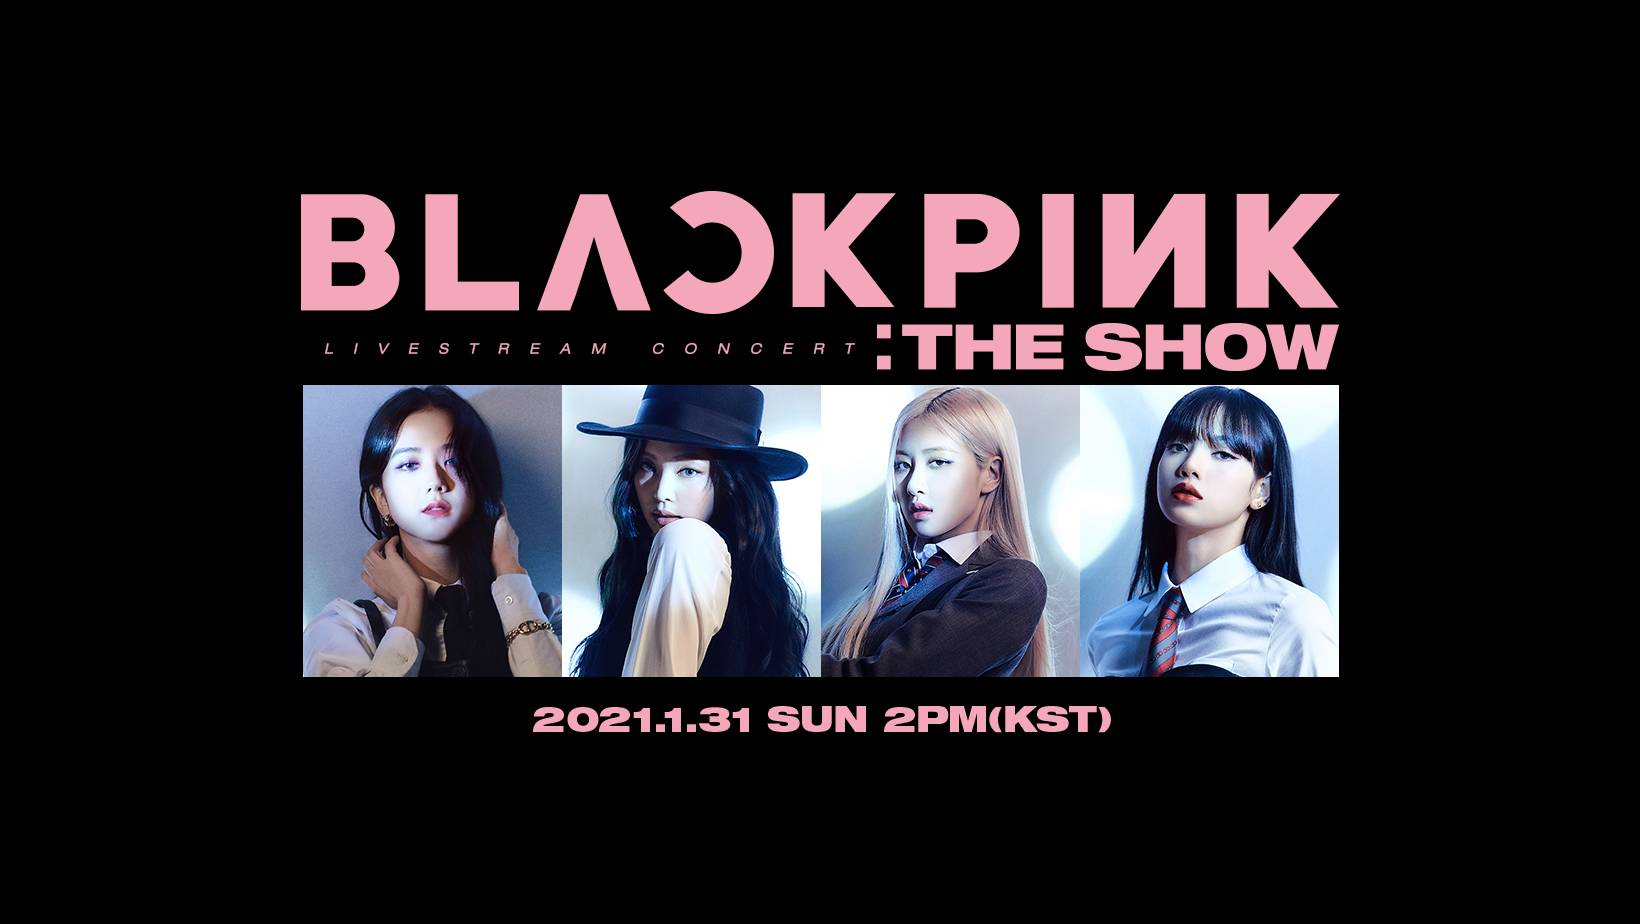 Blackpink slays at first livestream of The Show - The Red Circle